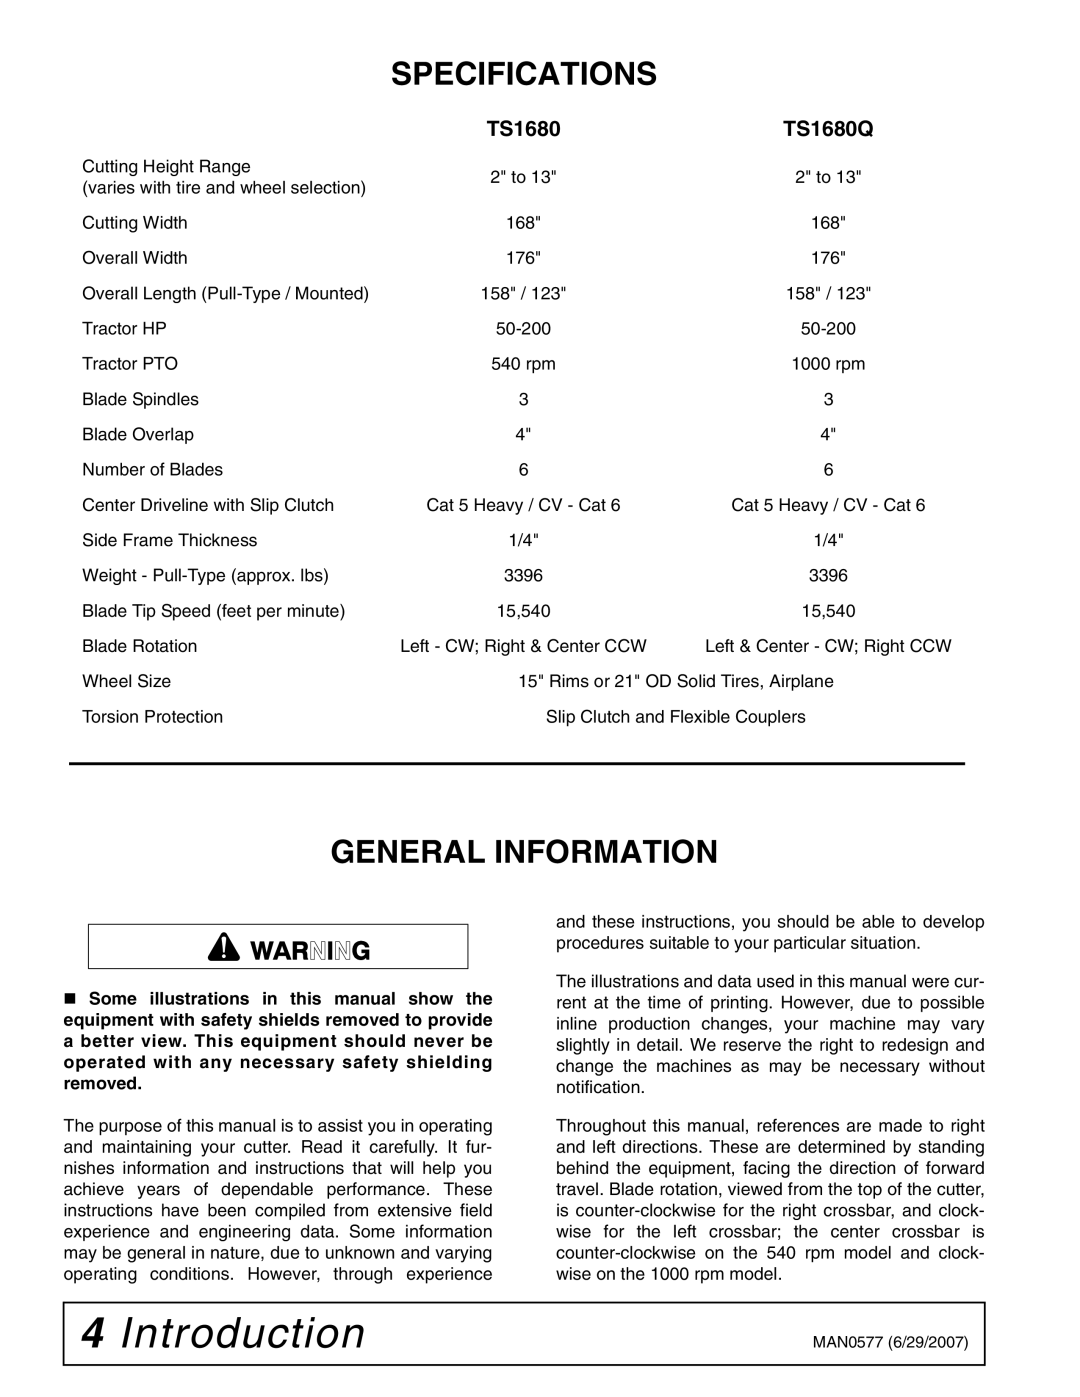 Woods Equipment TS1680Q manual Specifications, General Information 